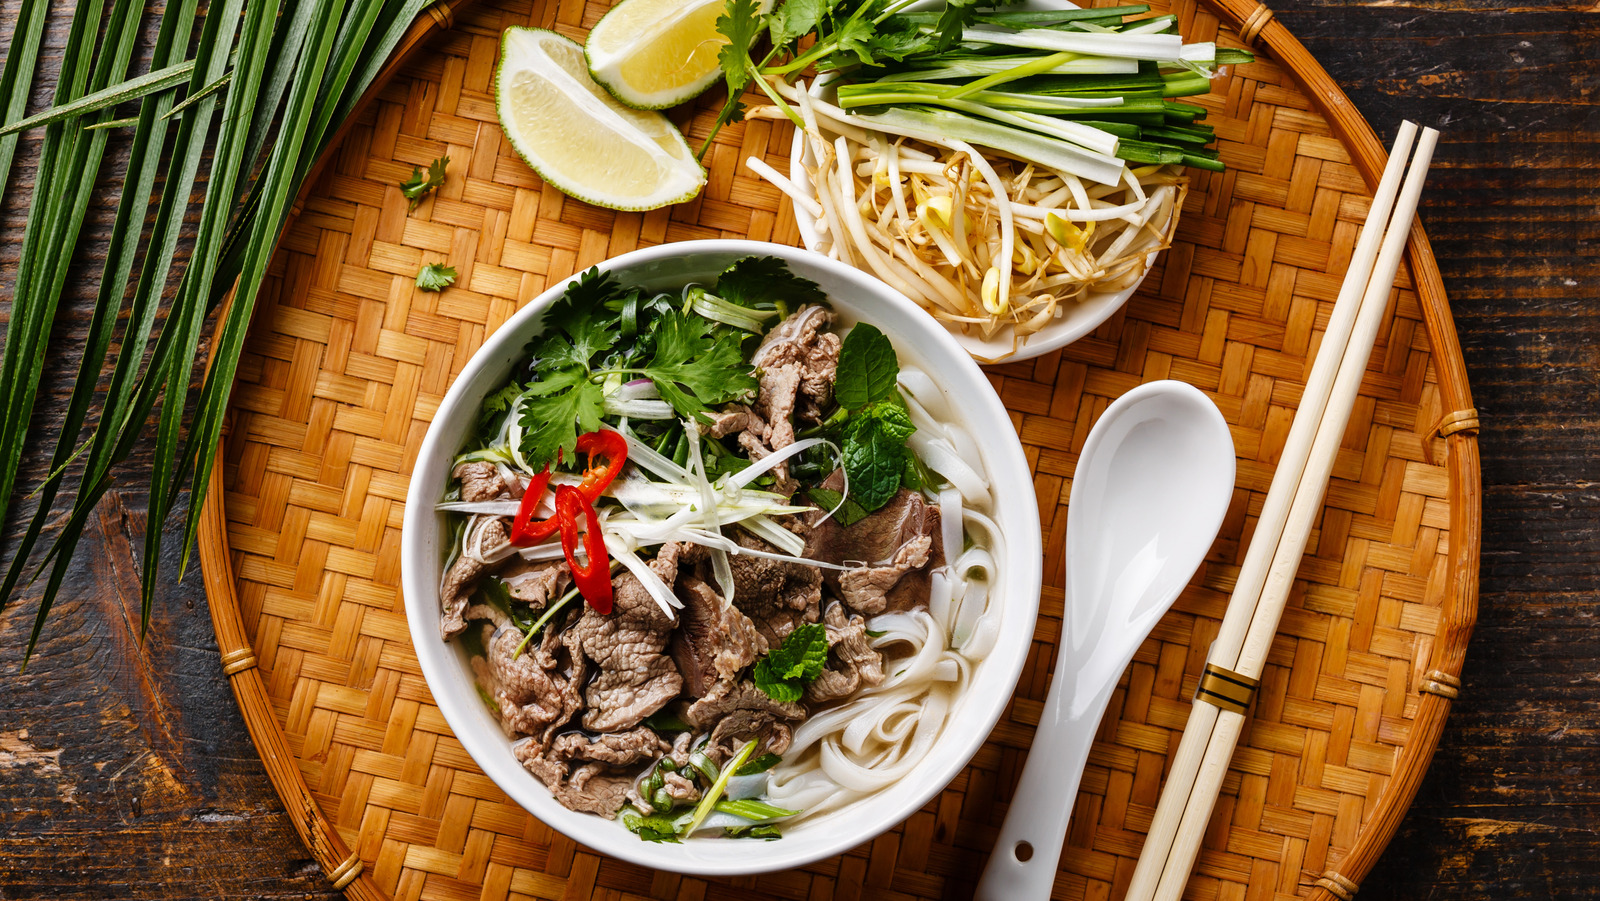 Pho Meat Guide With Pictures - Everything You Need To Know